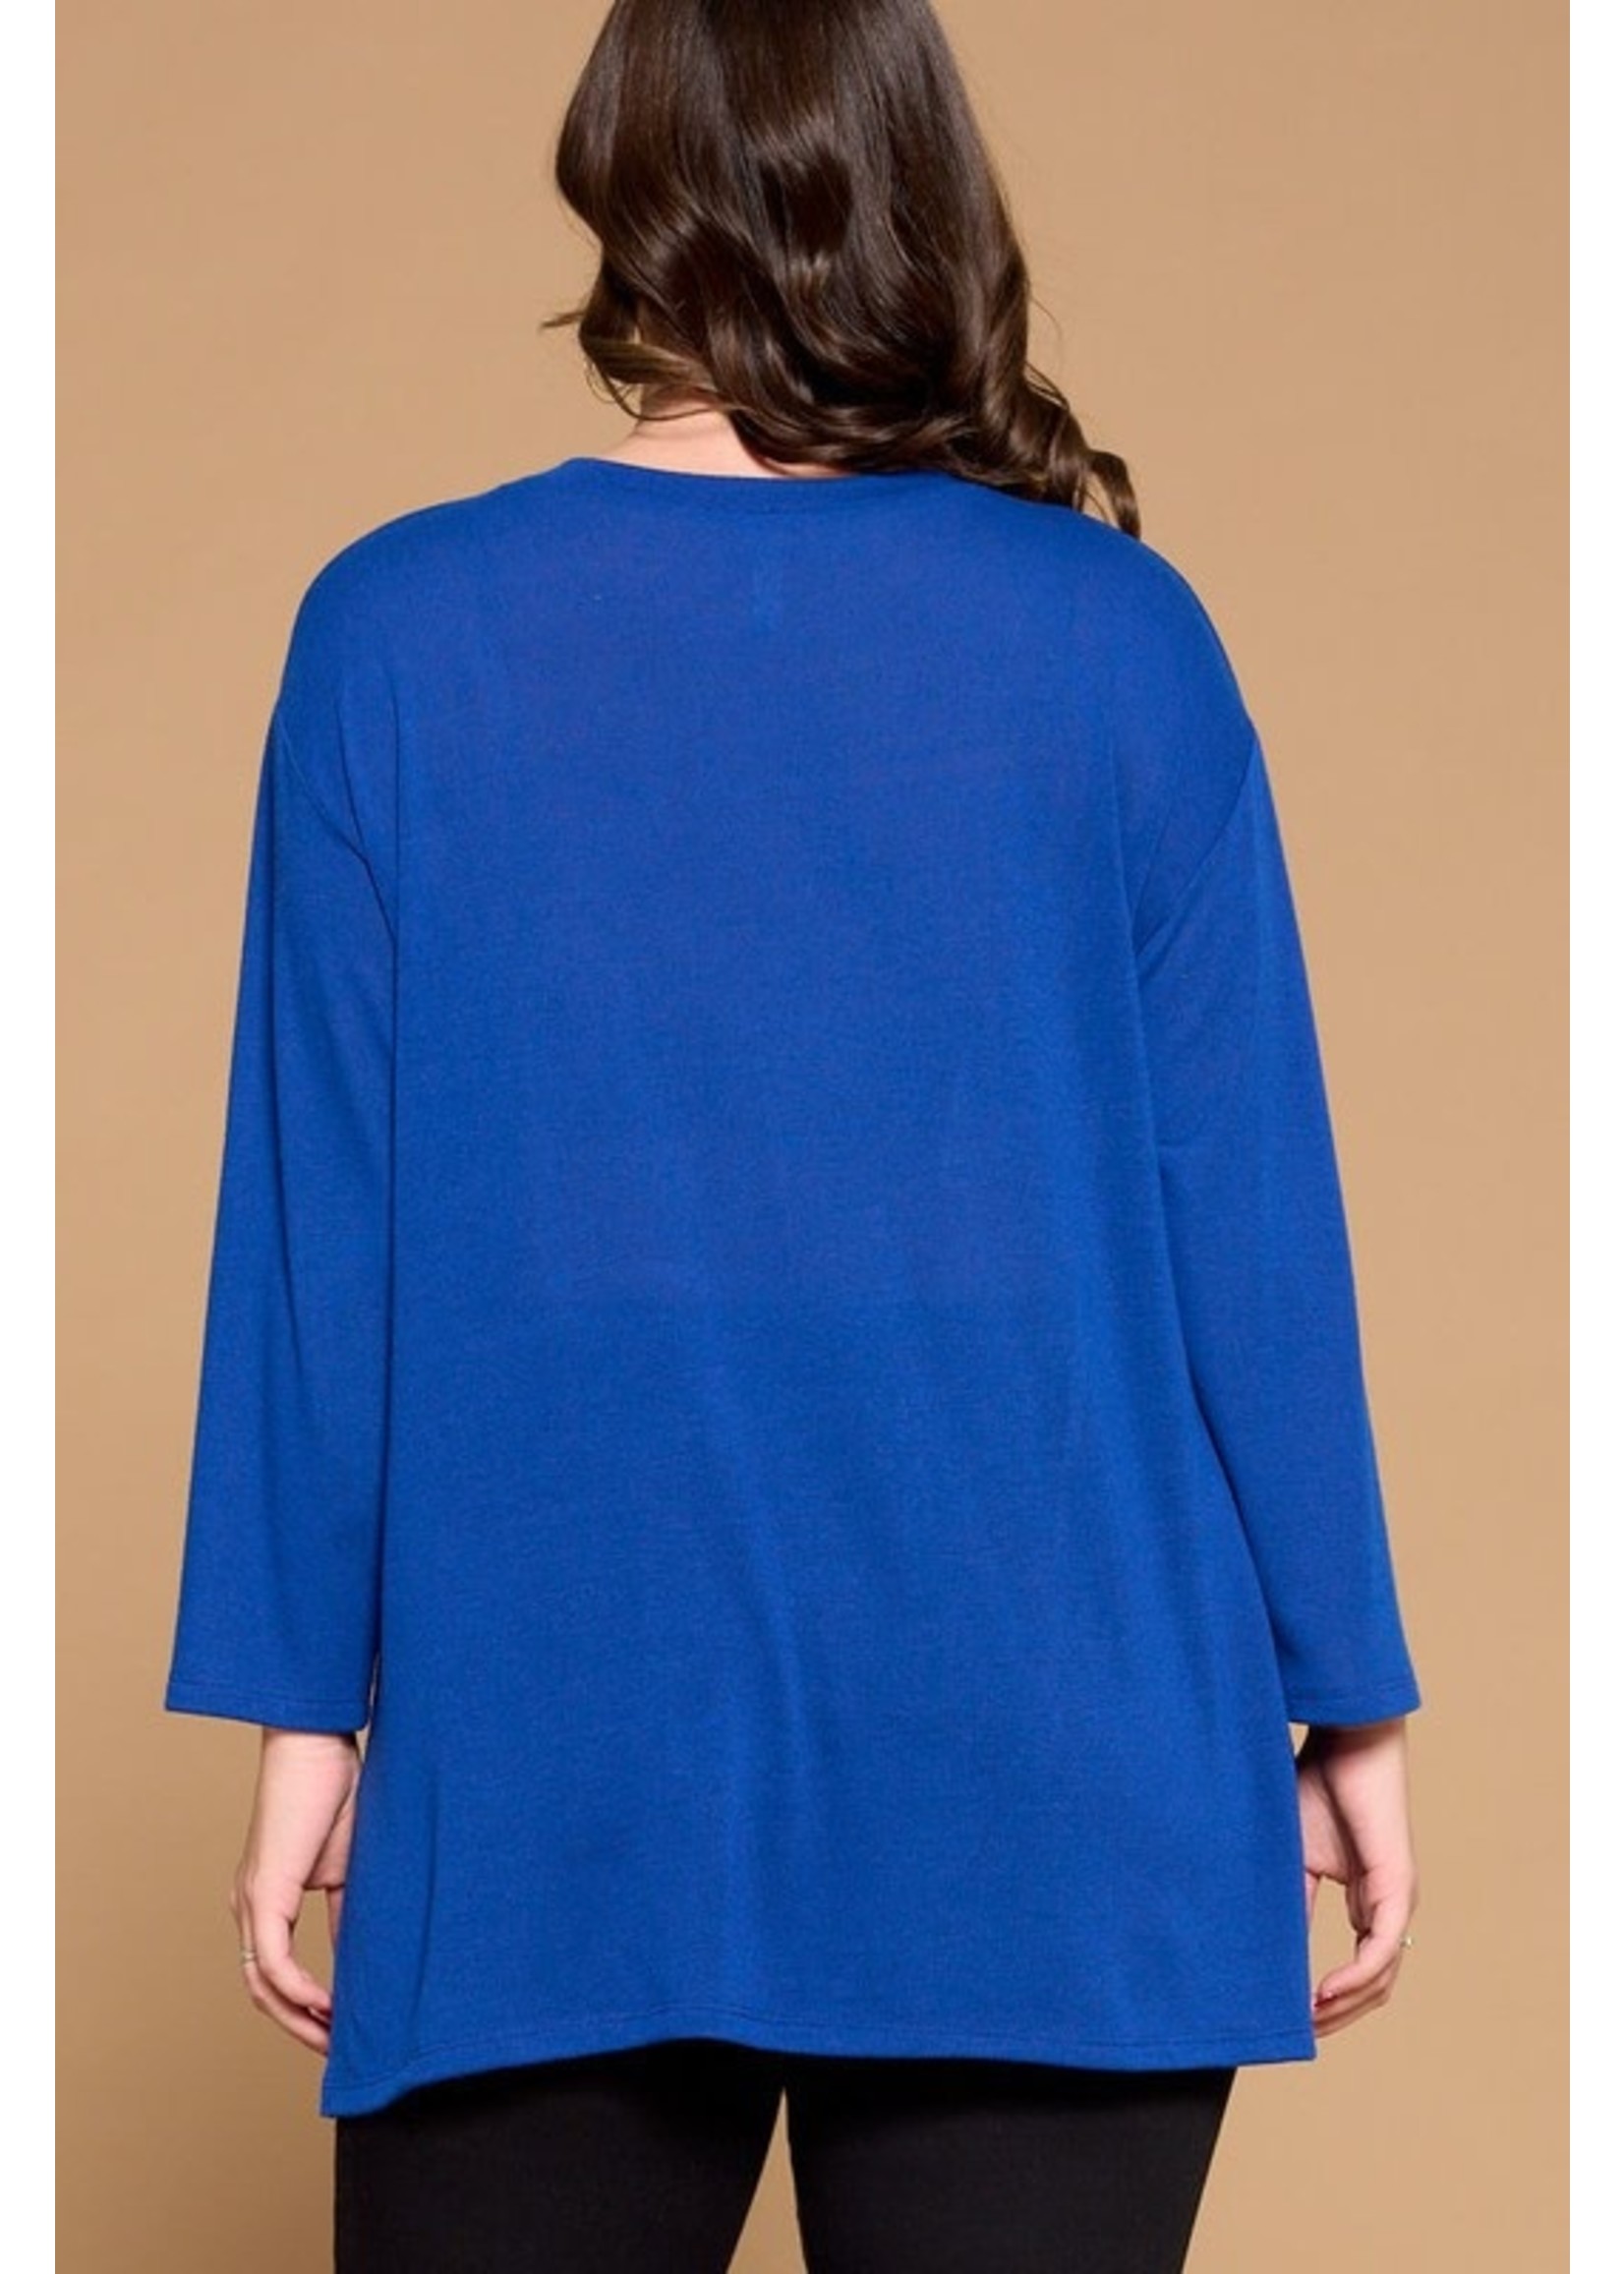 V-Neck 3/4 Sleeve Top in 2 colors